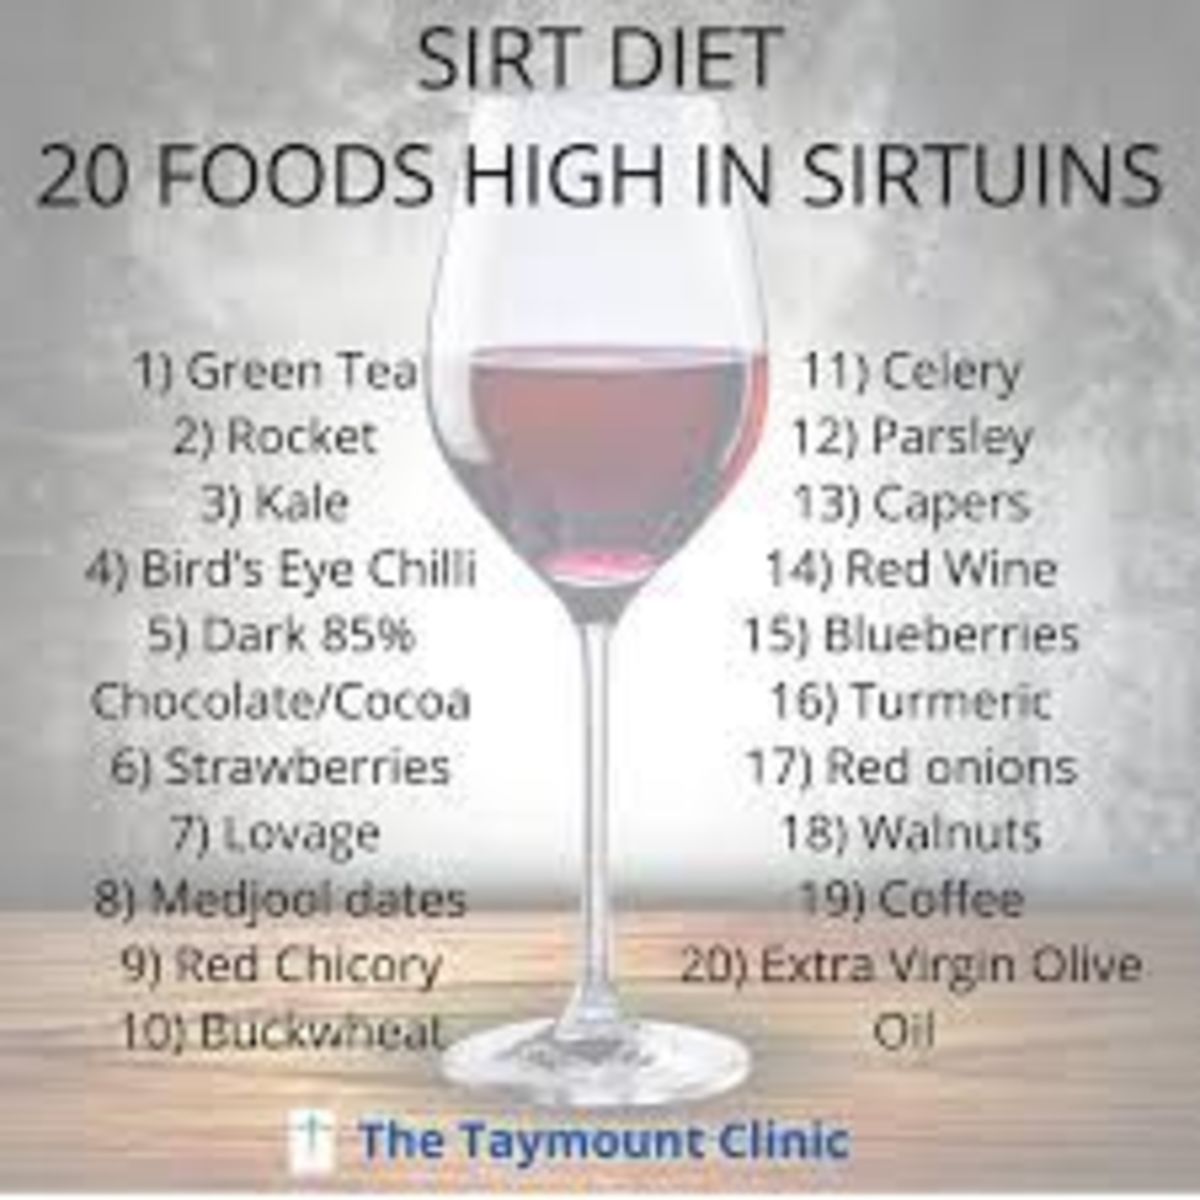 The top 20 sirtuin-rich foods that followers of the Sirtfood diet can consume to activate the 'skinny genes'